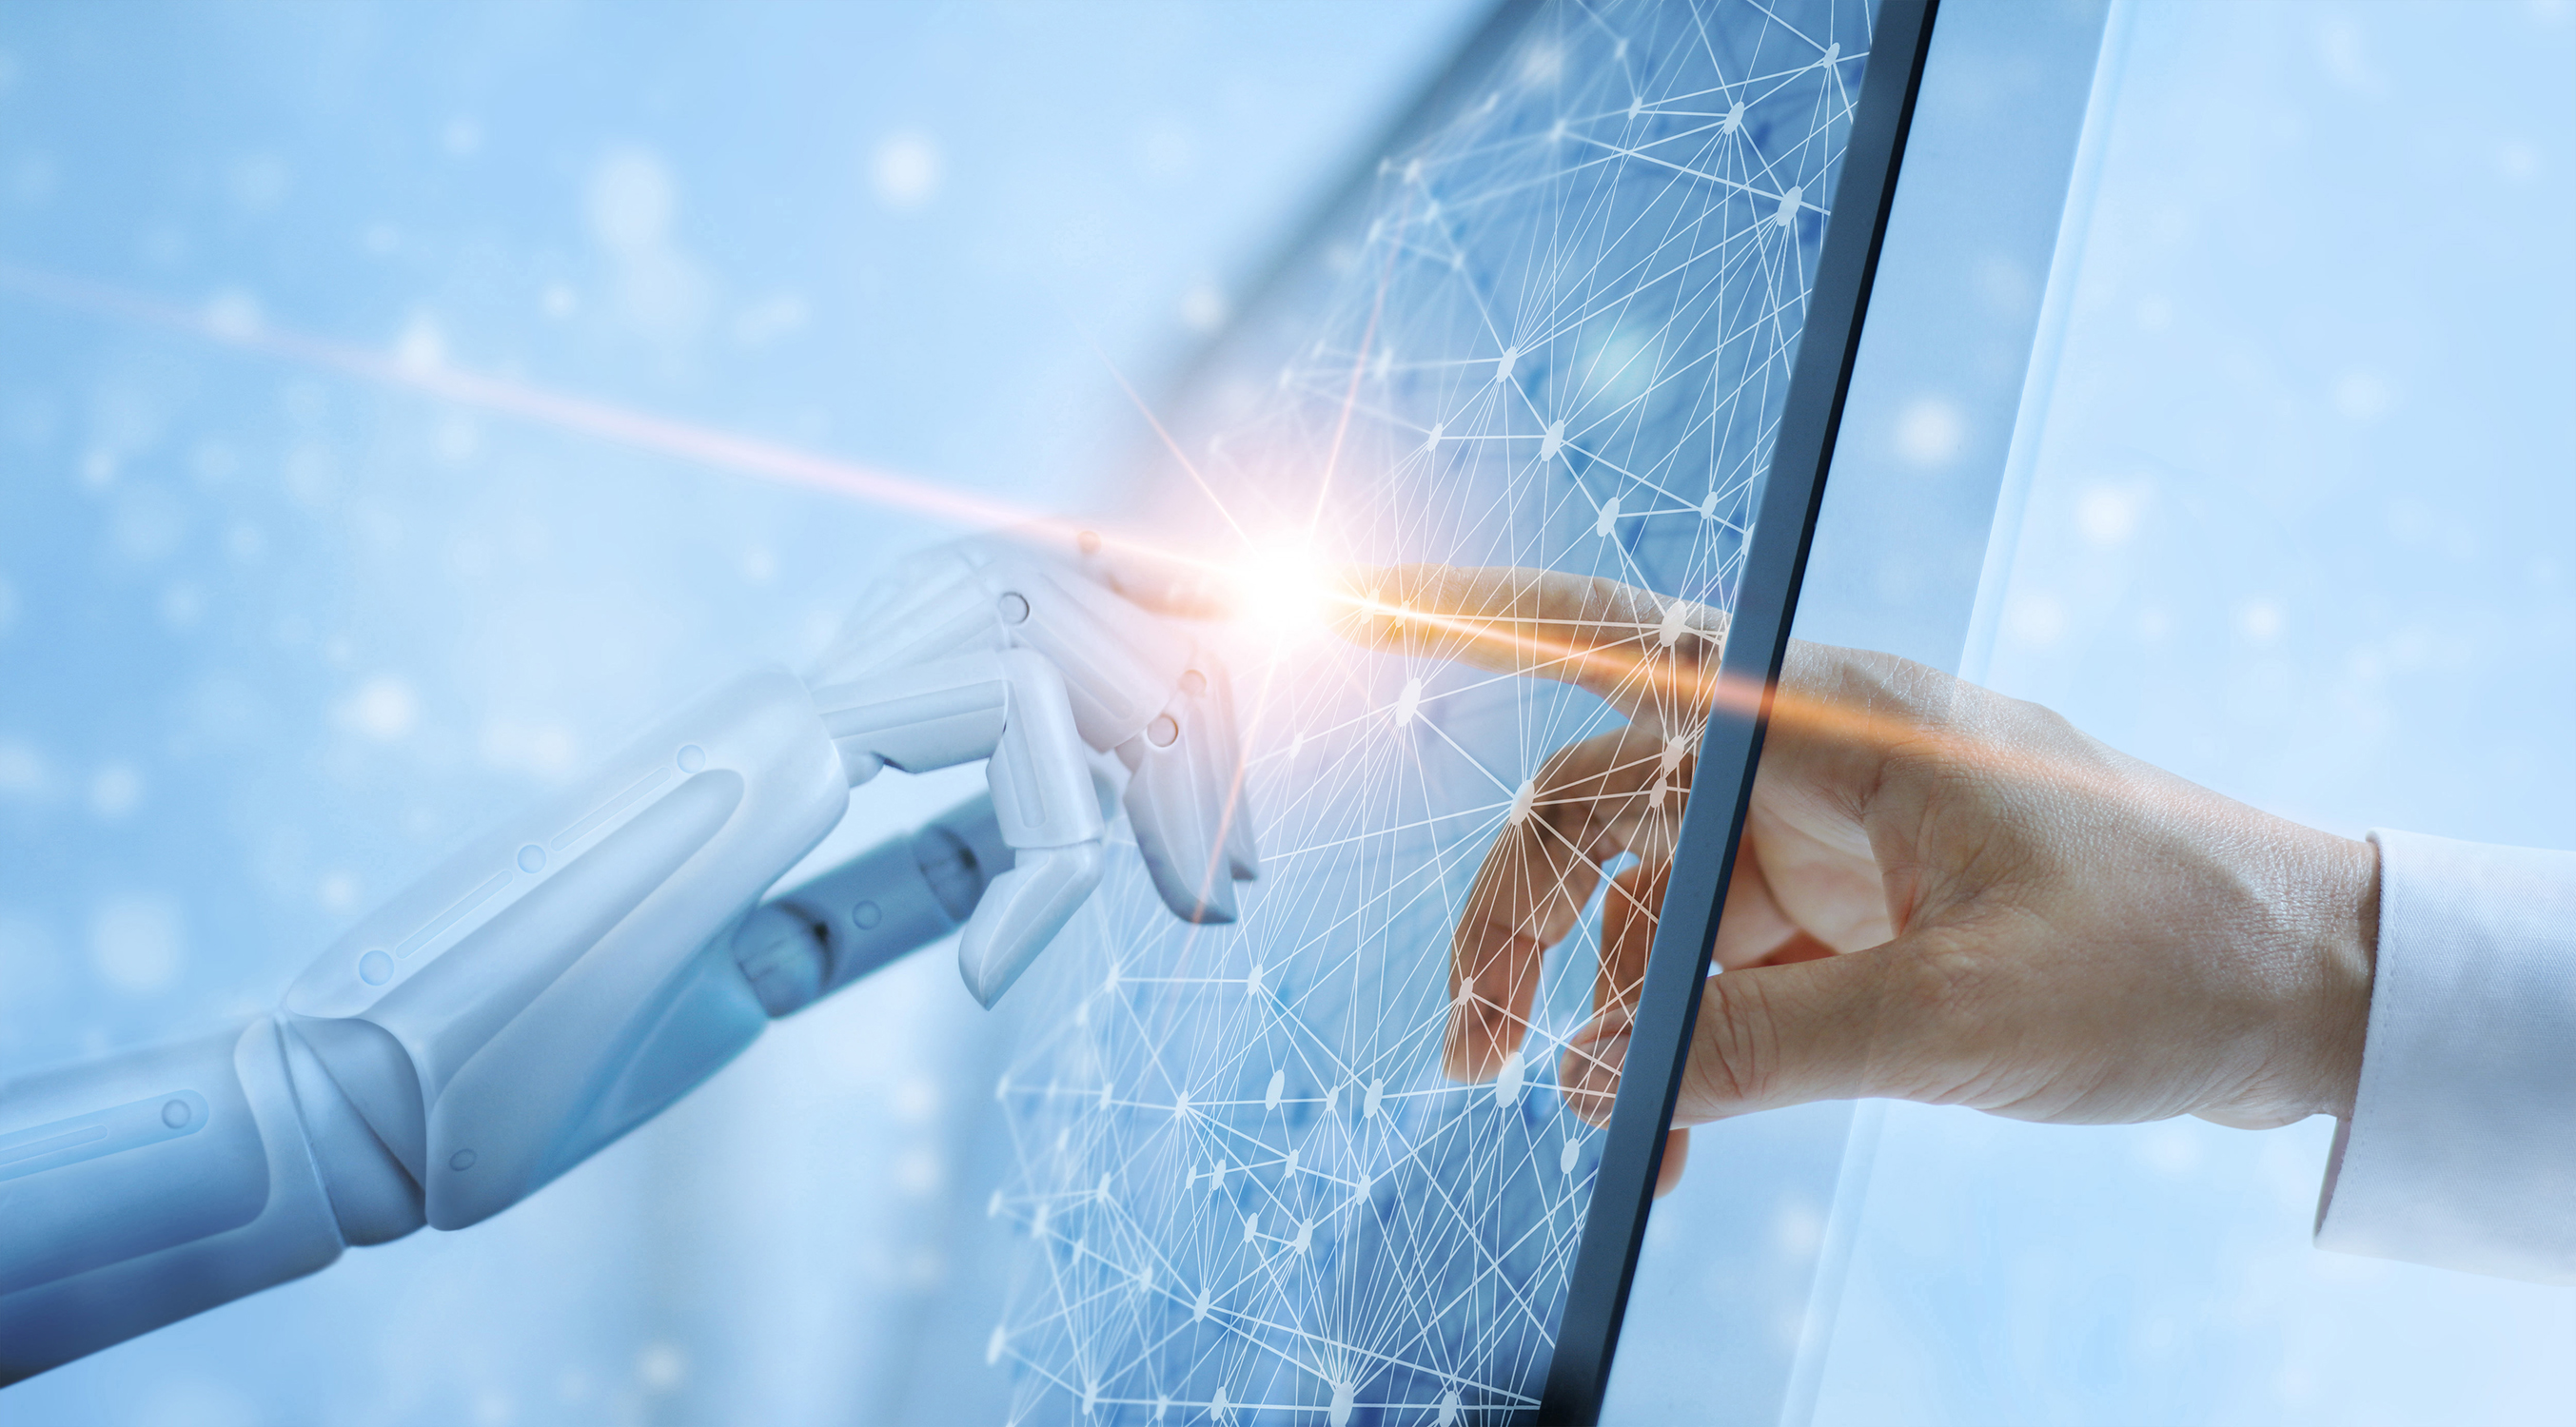 Deep learning is a highly flexible and adaptive artificial intelligence tool that, when exposed to new datasets, can increase its ability to identify patterns and classify relationships between data. (Source: Istock Copyright: ipopba ID: 1051617224).